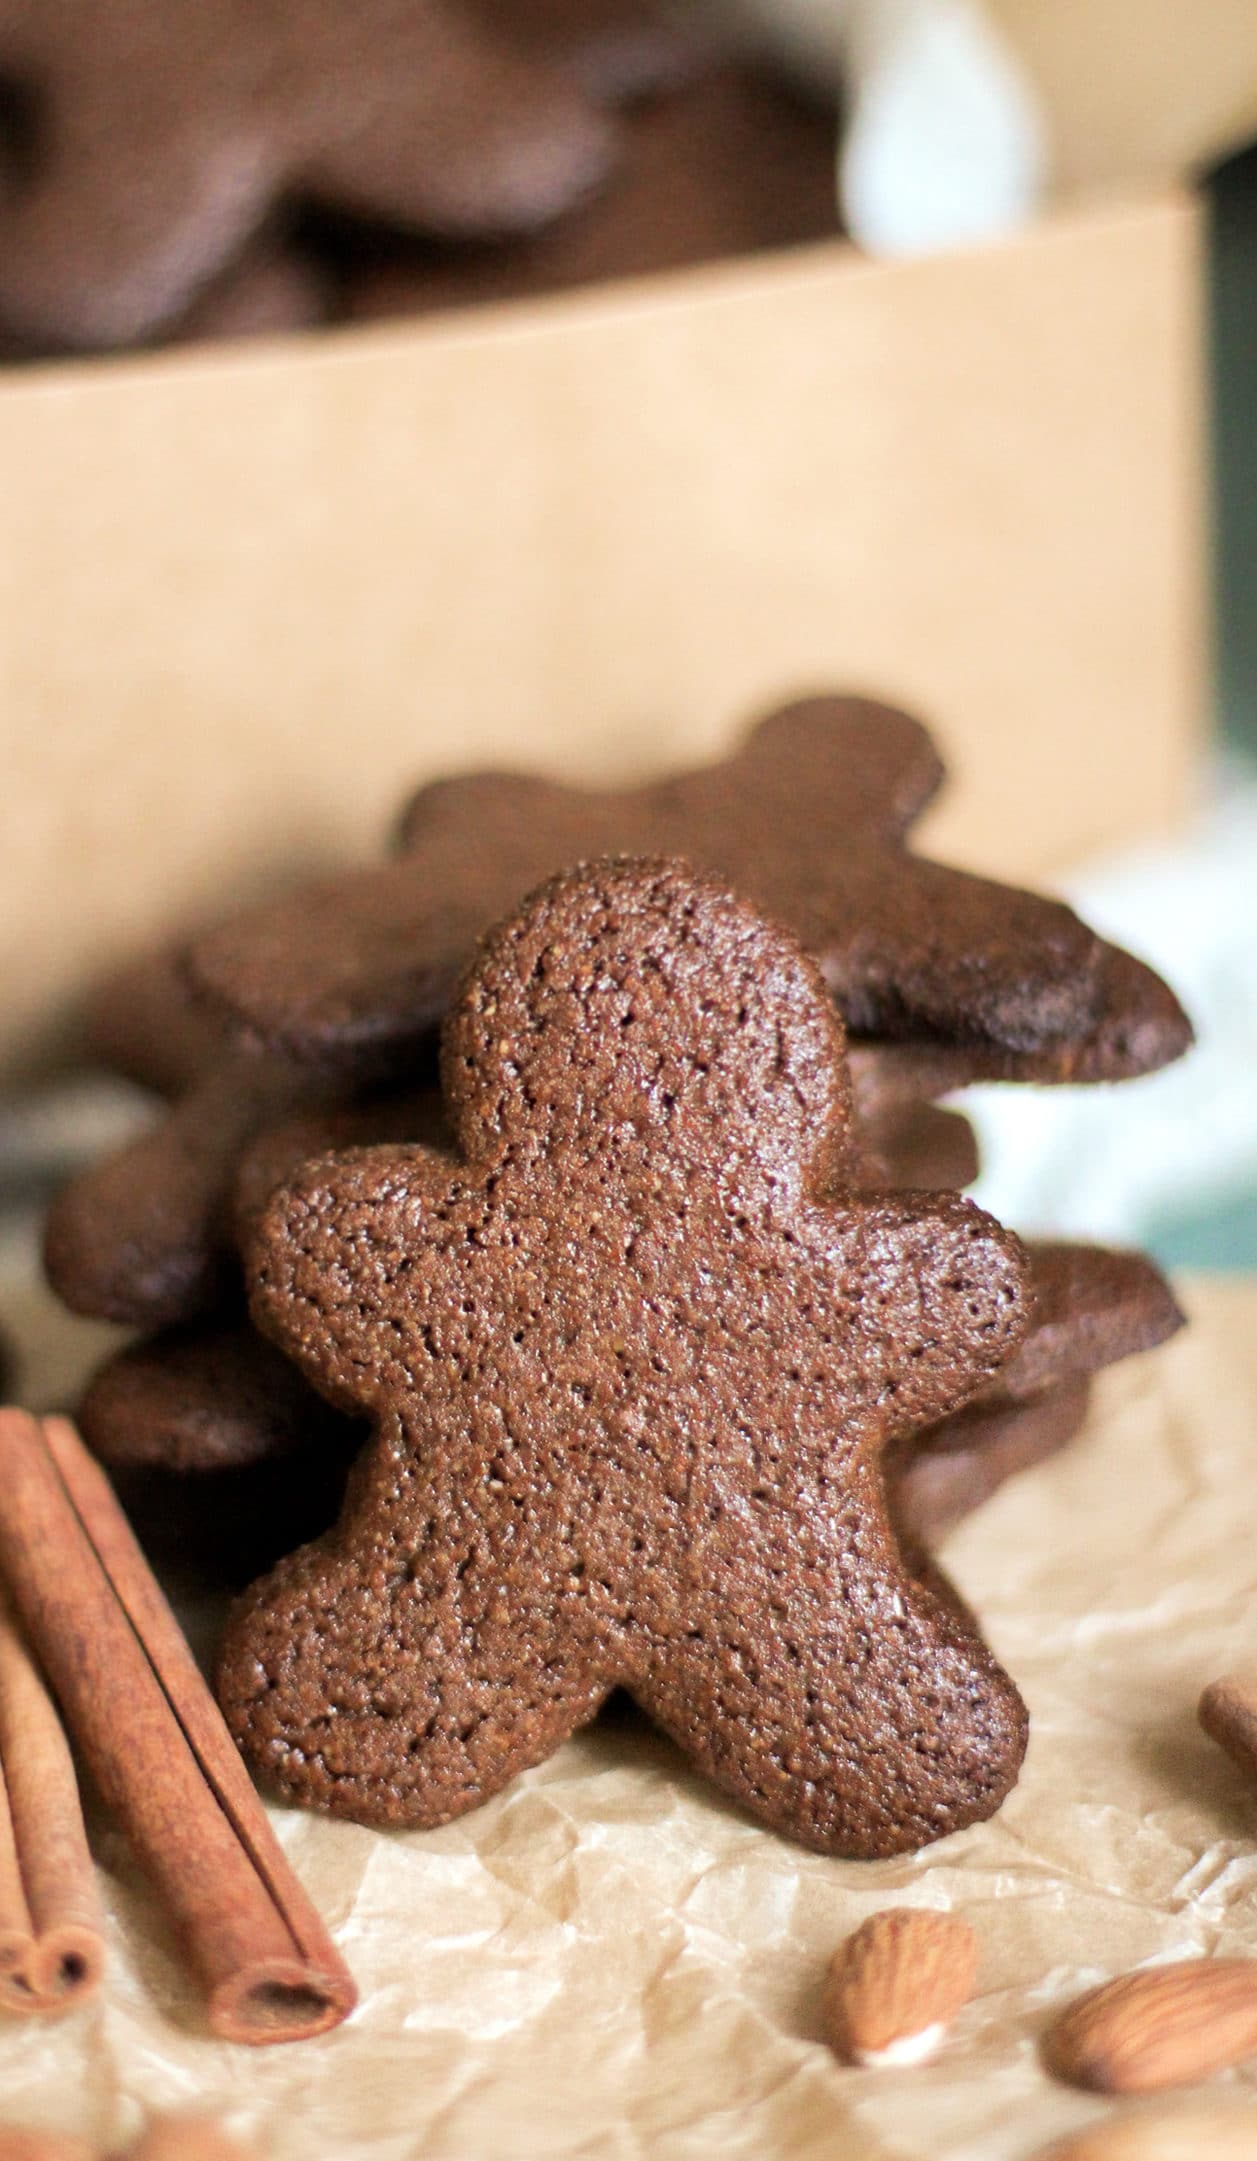 Healthy Gingerbread Cookies recipe (refined sugar free, gluten free, dairy free, vegan) - Healthy Dessert Recipes at Desserts with Benefits